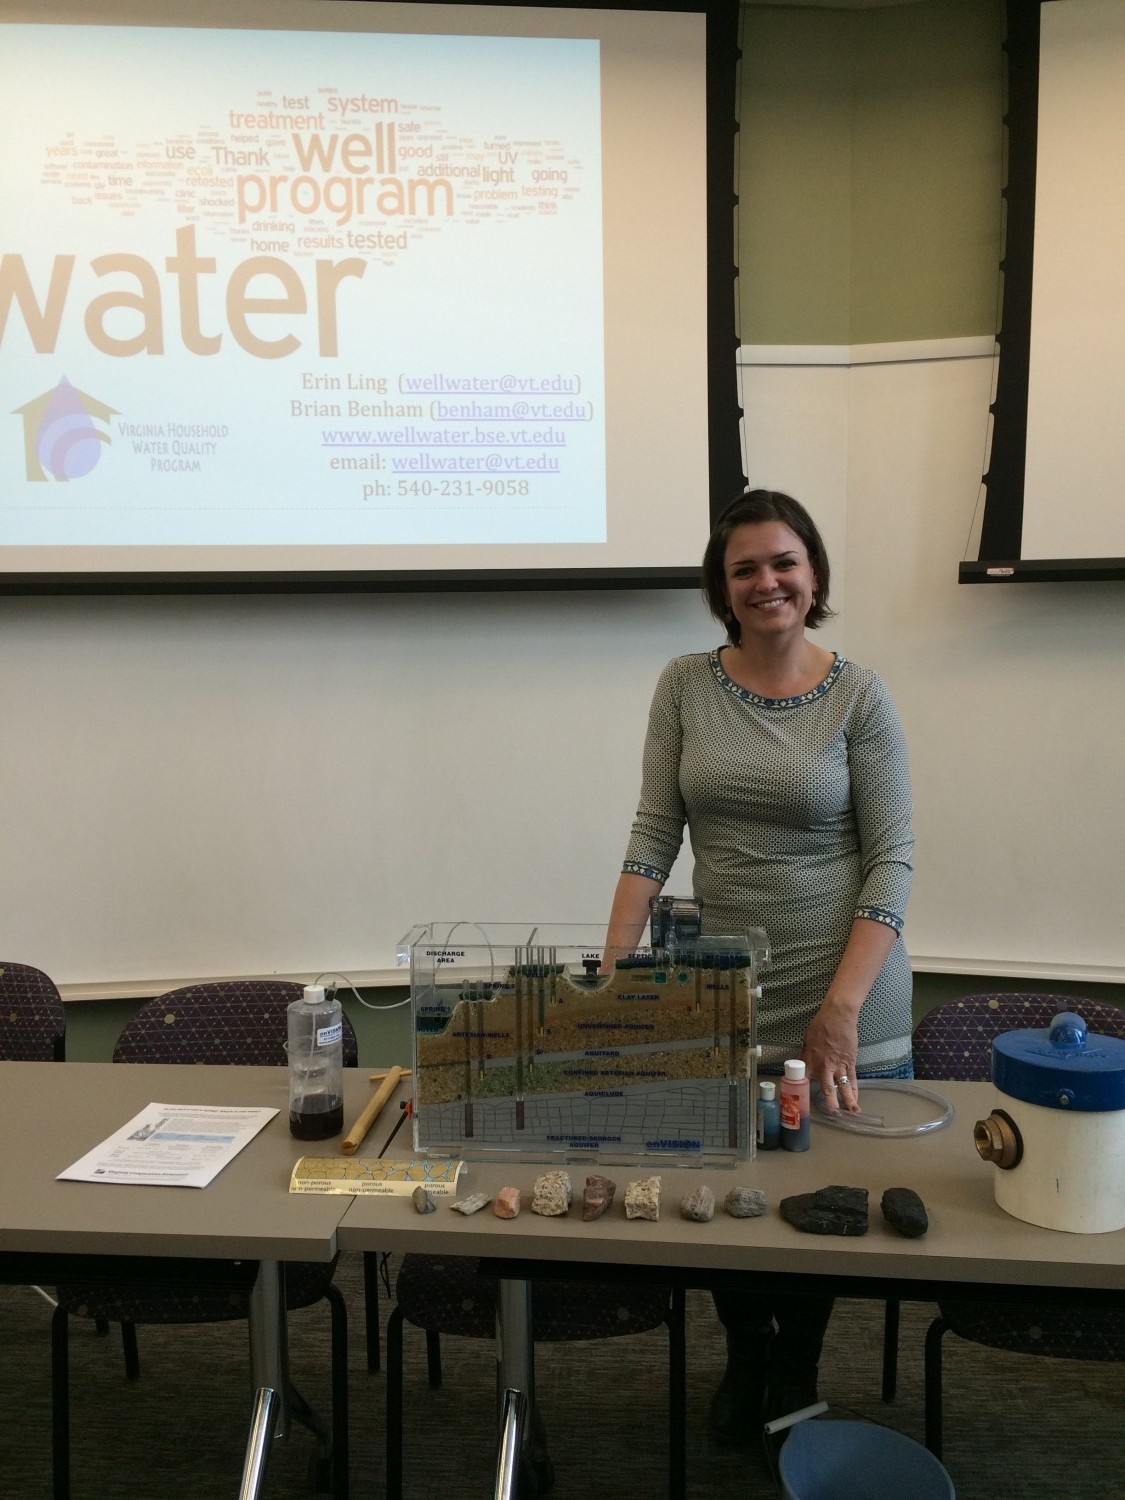 Erin Ling presents a demonstration of groundwater infiltration using a small model